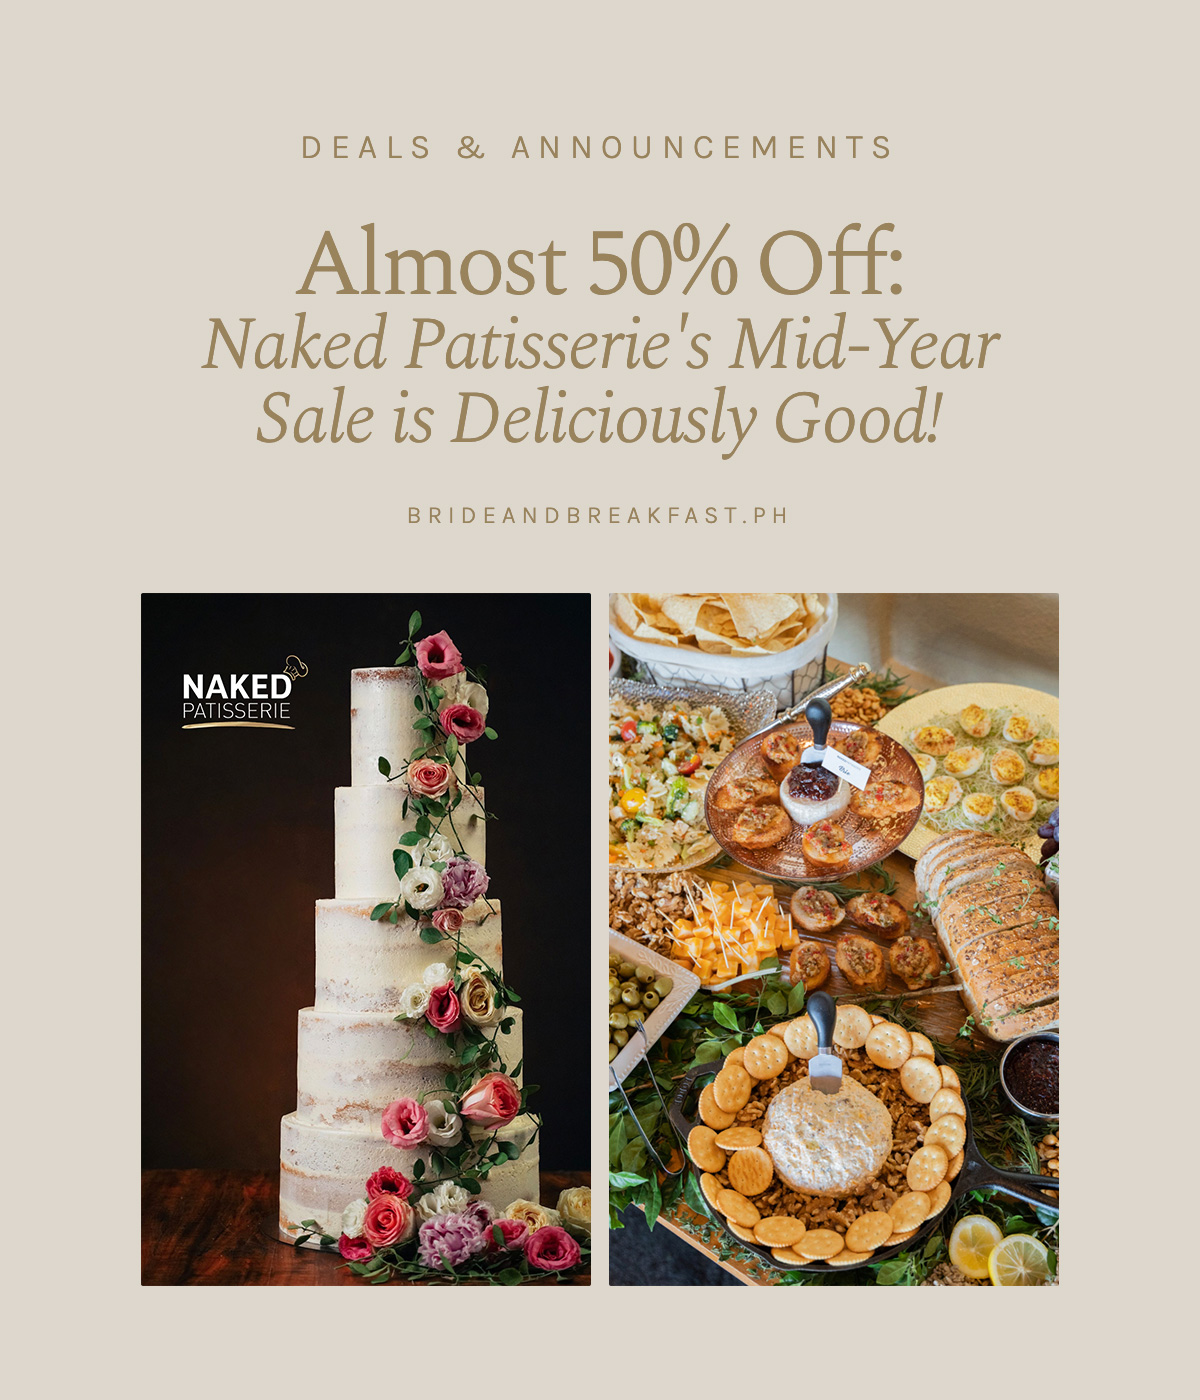 Almost 50% Off: Naked Patisserie's Mid-Year Sale is Deliciously Good!